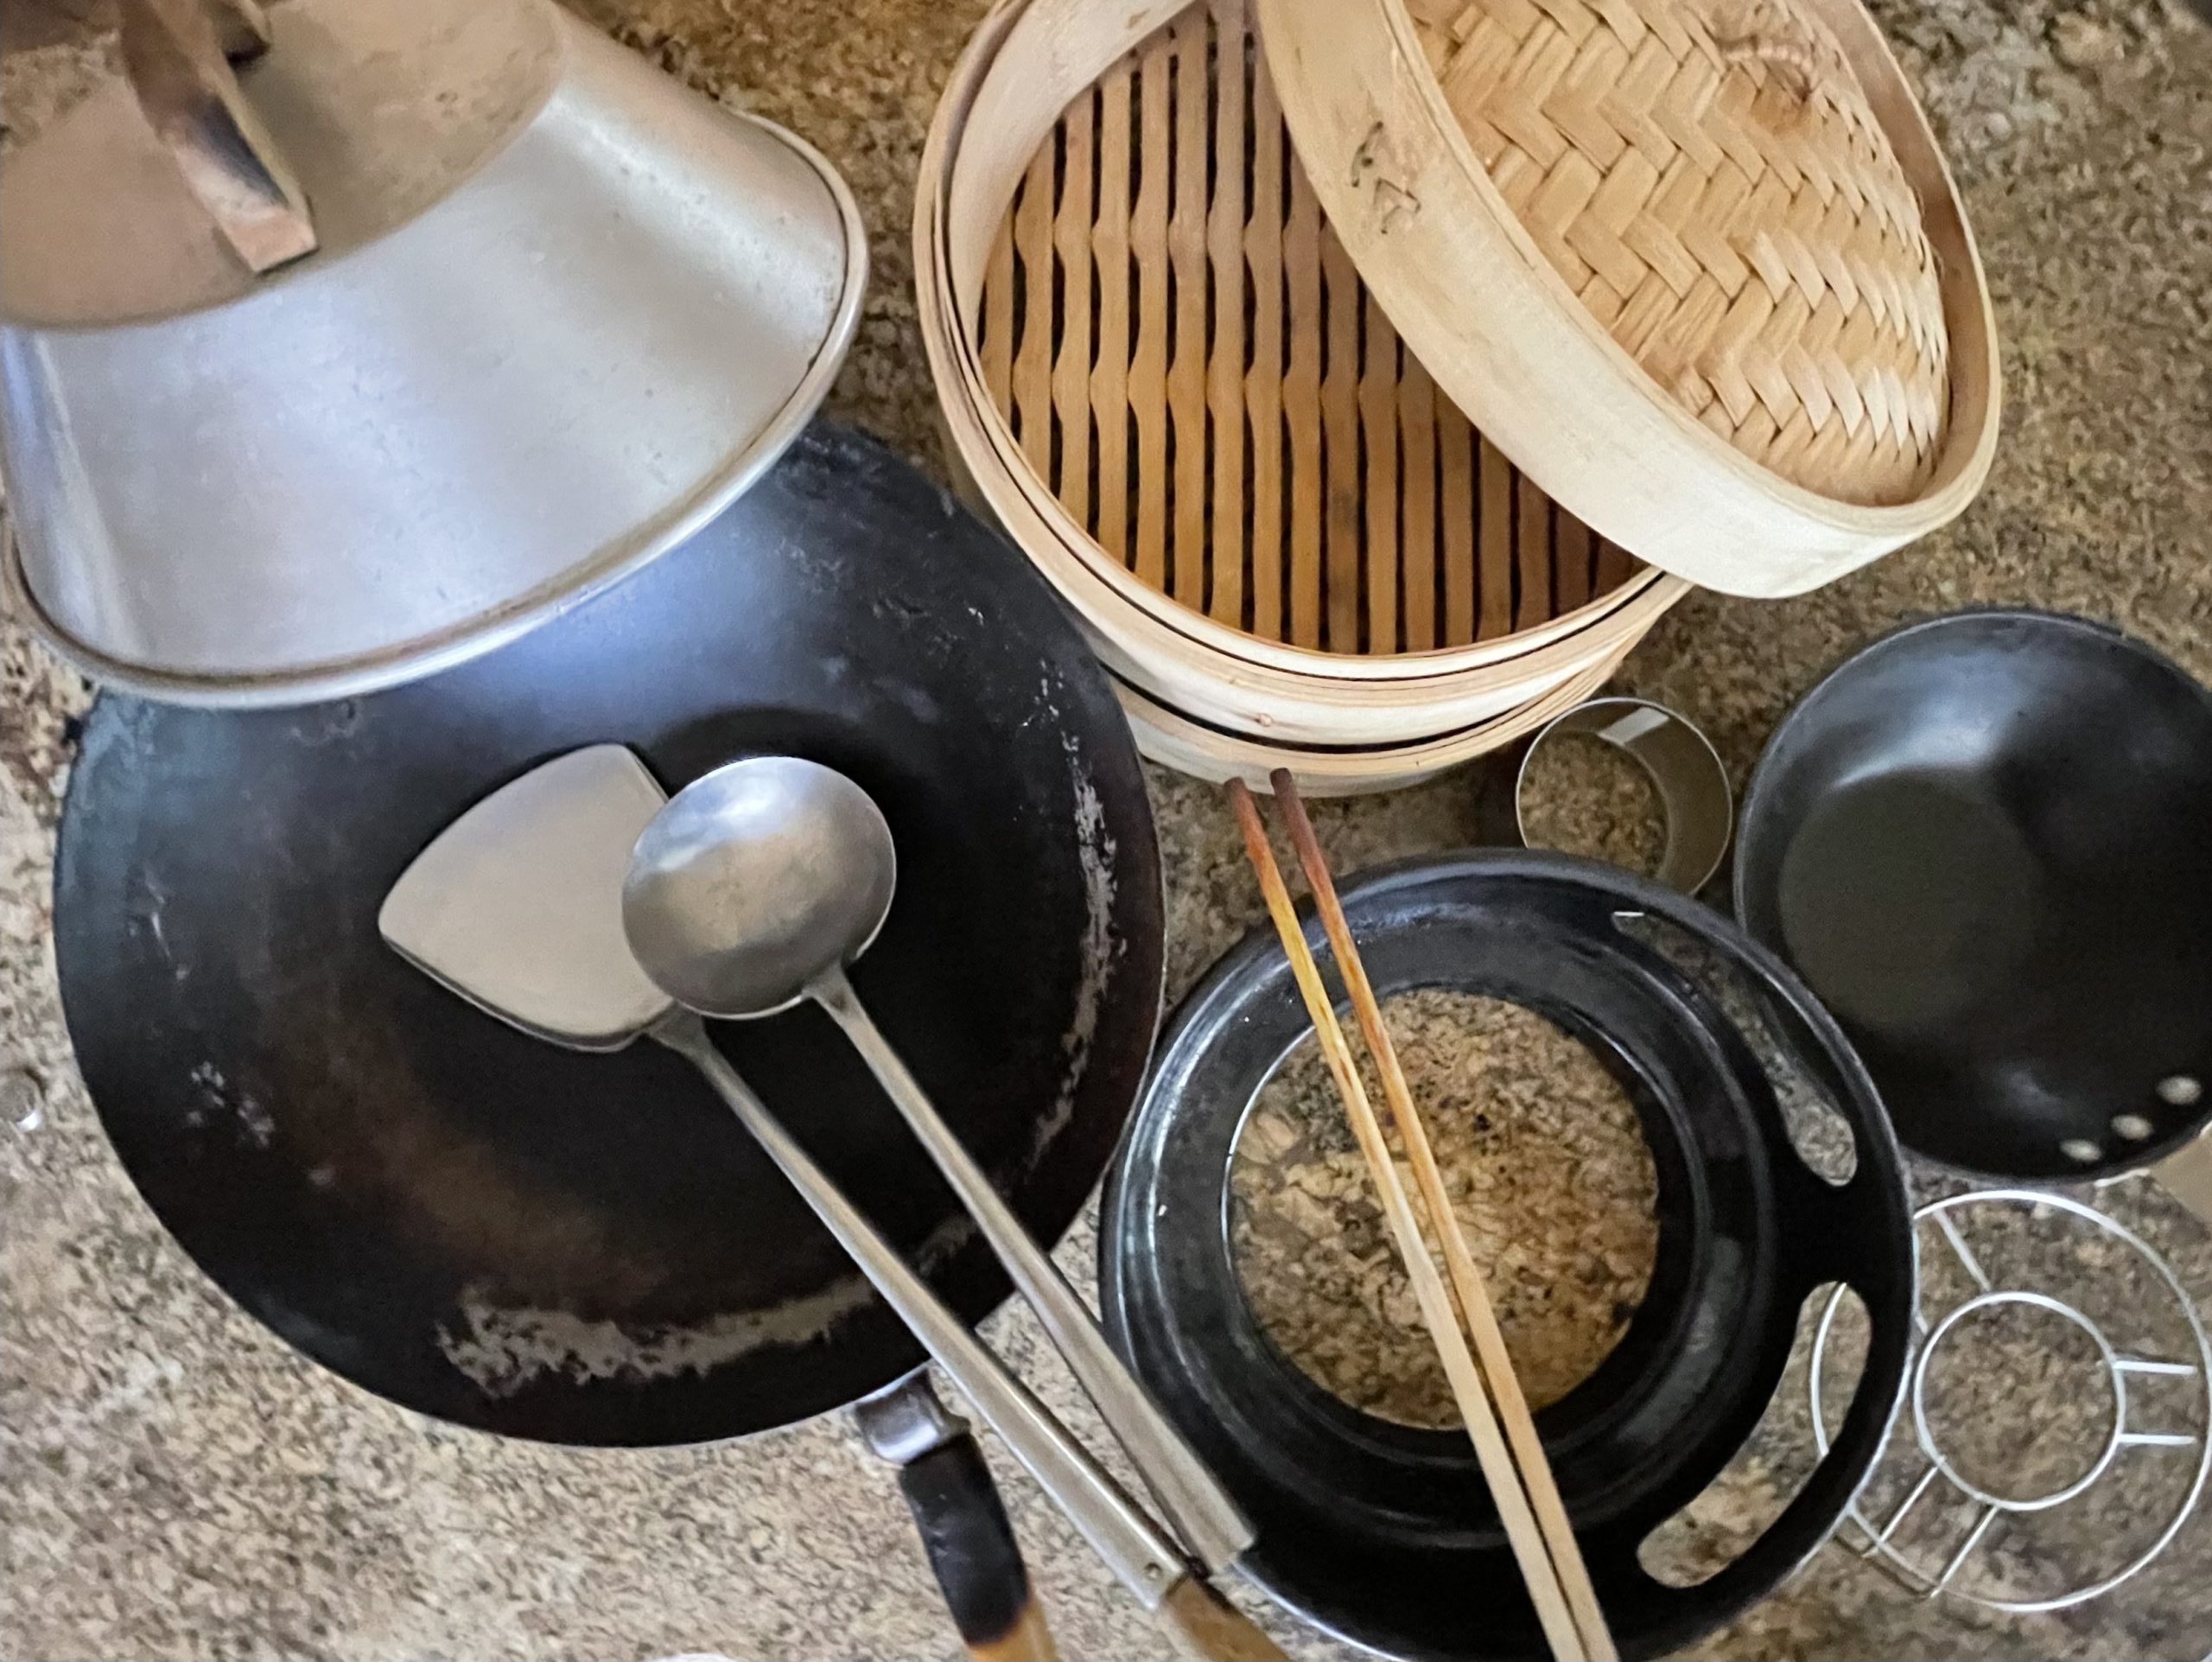 Chinese cookware and utensils